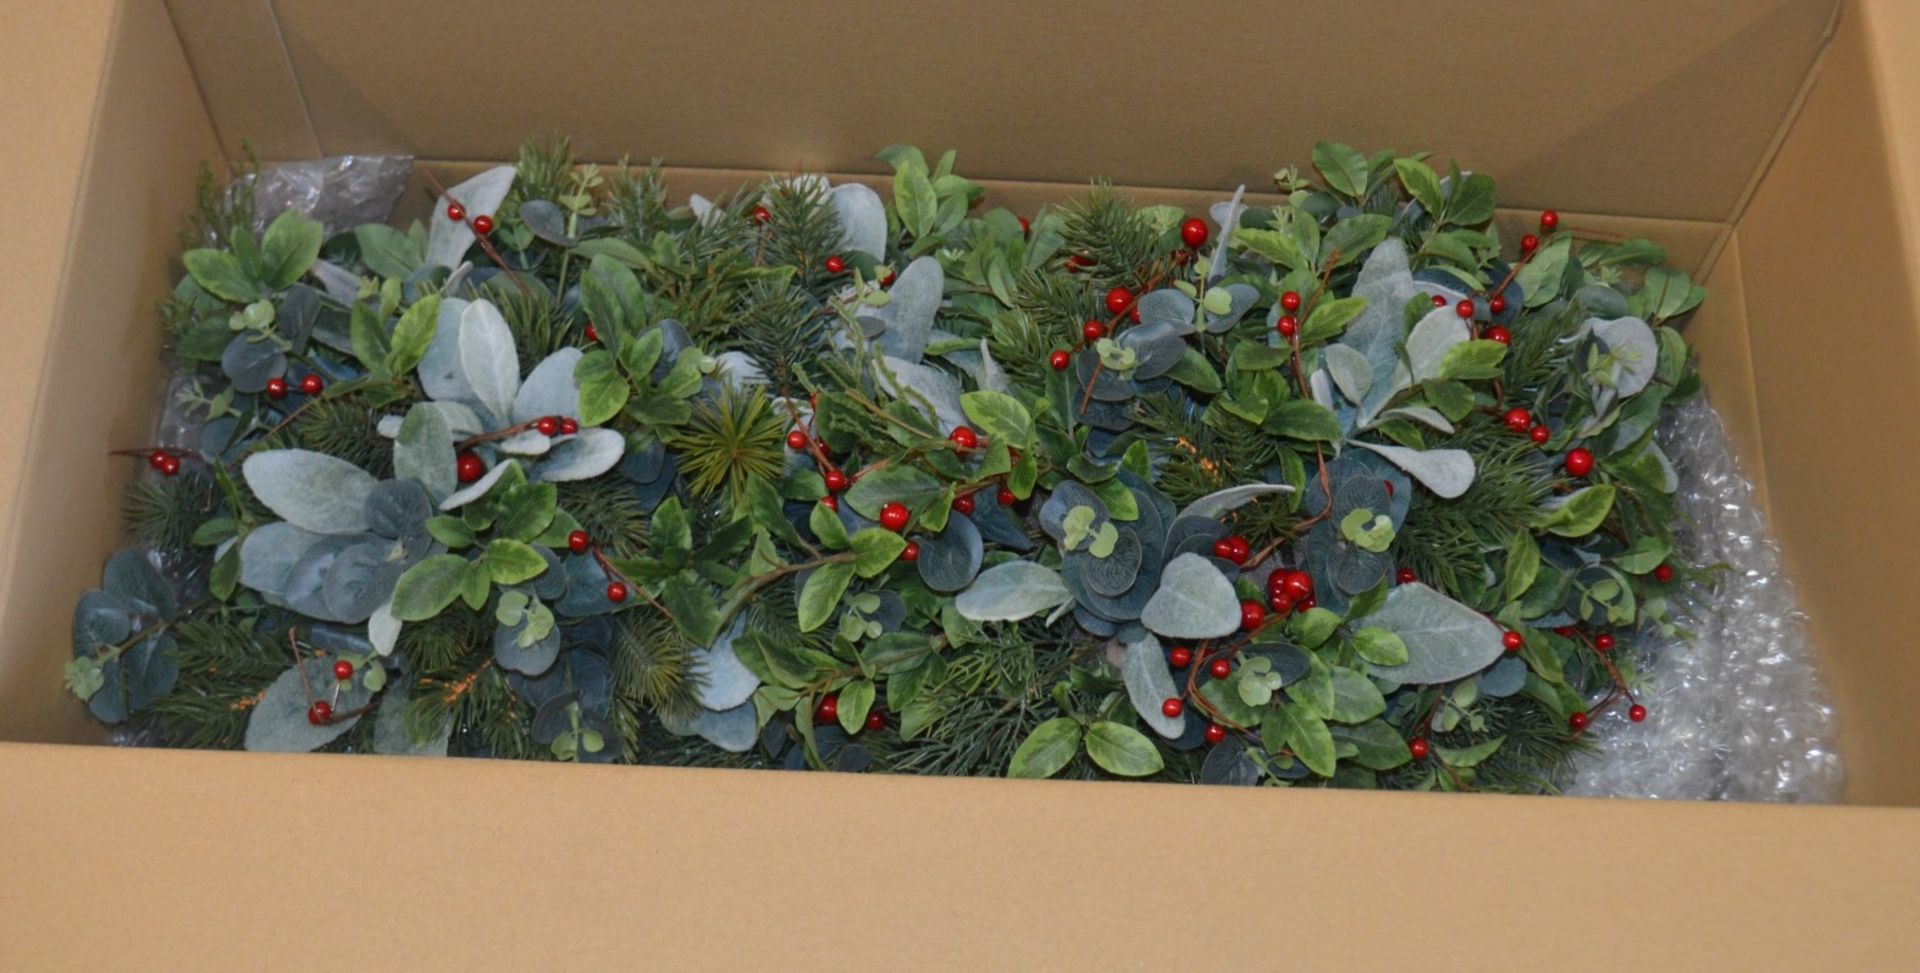 4 x Commercial Decorative Christmas Wreaths - Variety As Shown - Dimensions: 50 x 30cm - Ex- - Image 2 of 4